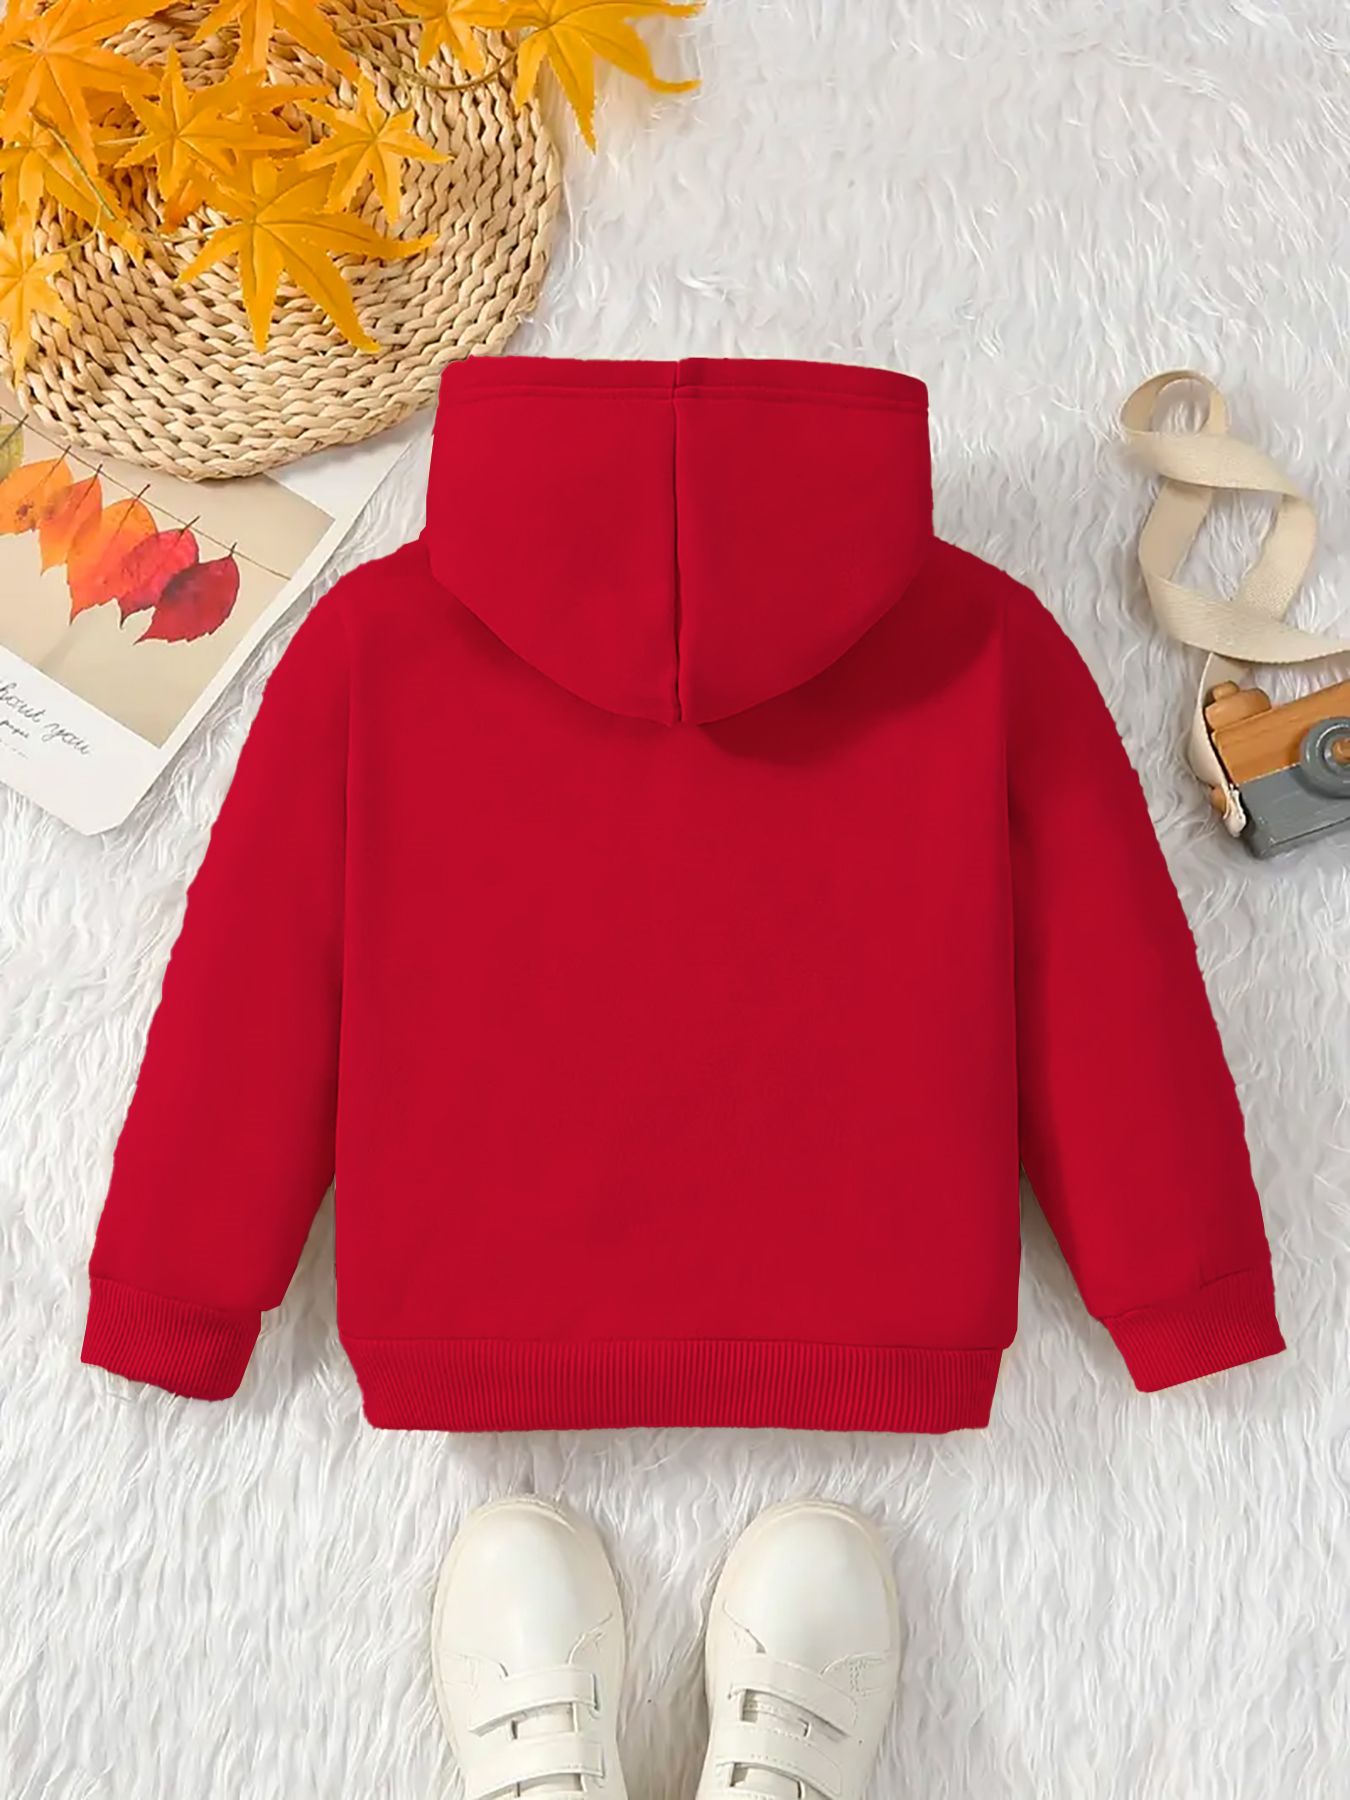 Sweatshirt for girl and boy, with or without hood